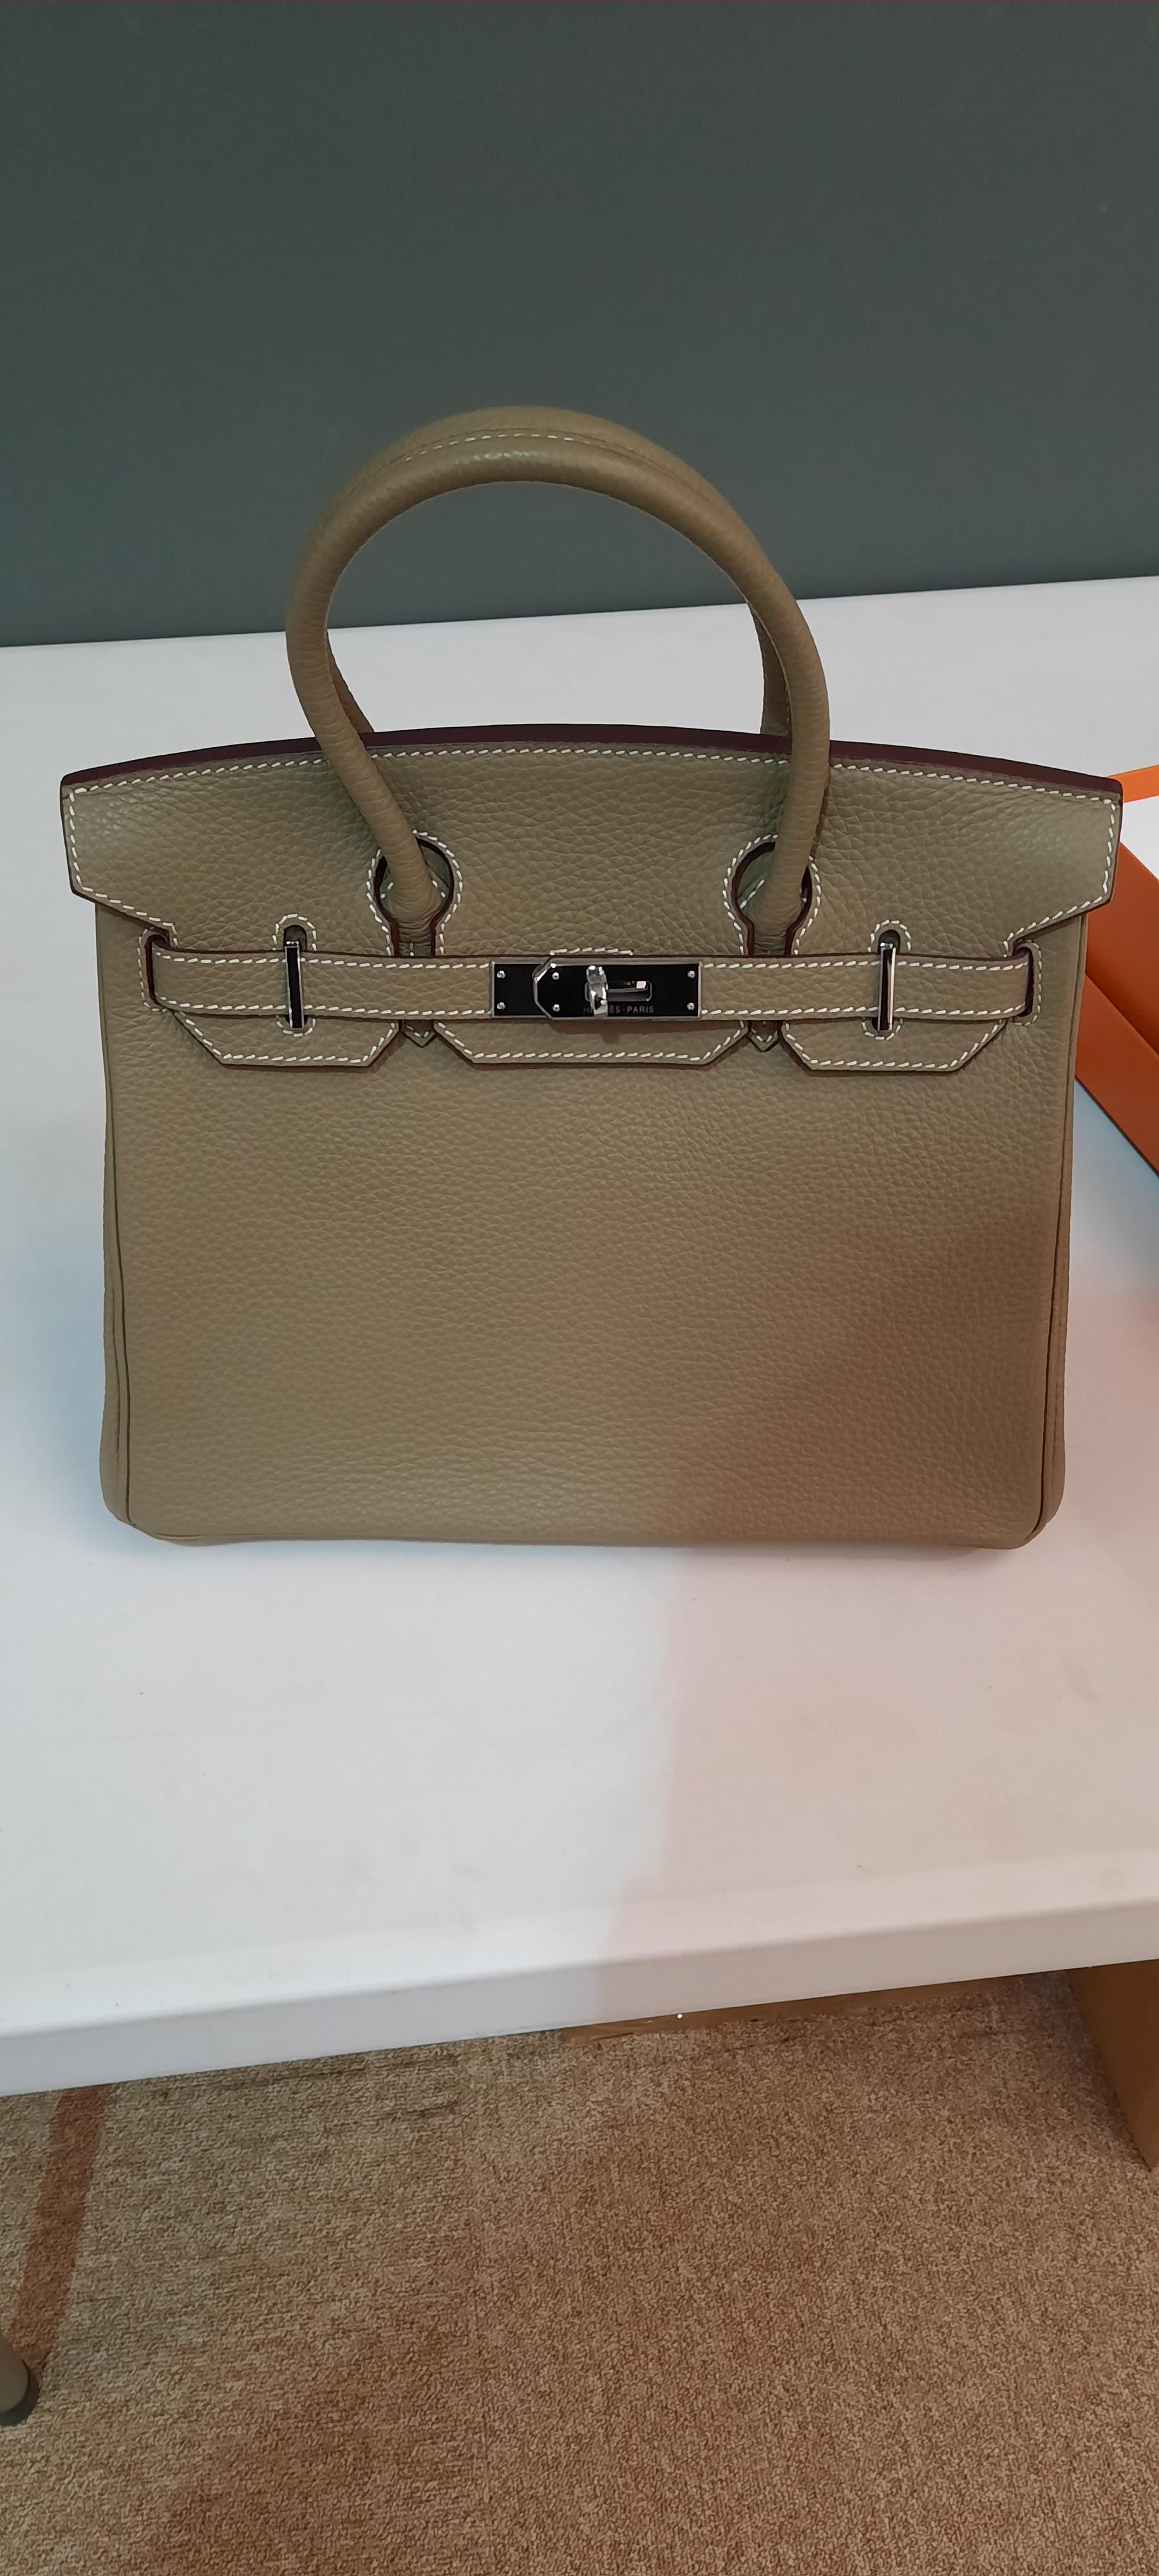 Hermes Birkin bag 30 Trench Clemence leather Silver hardware